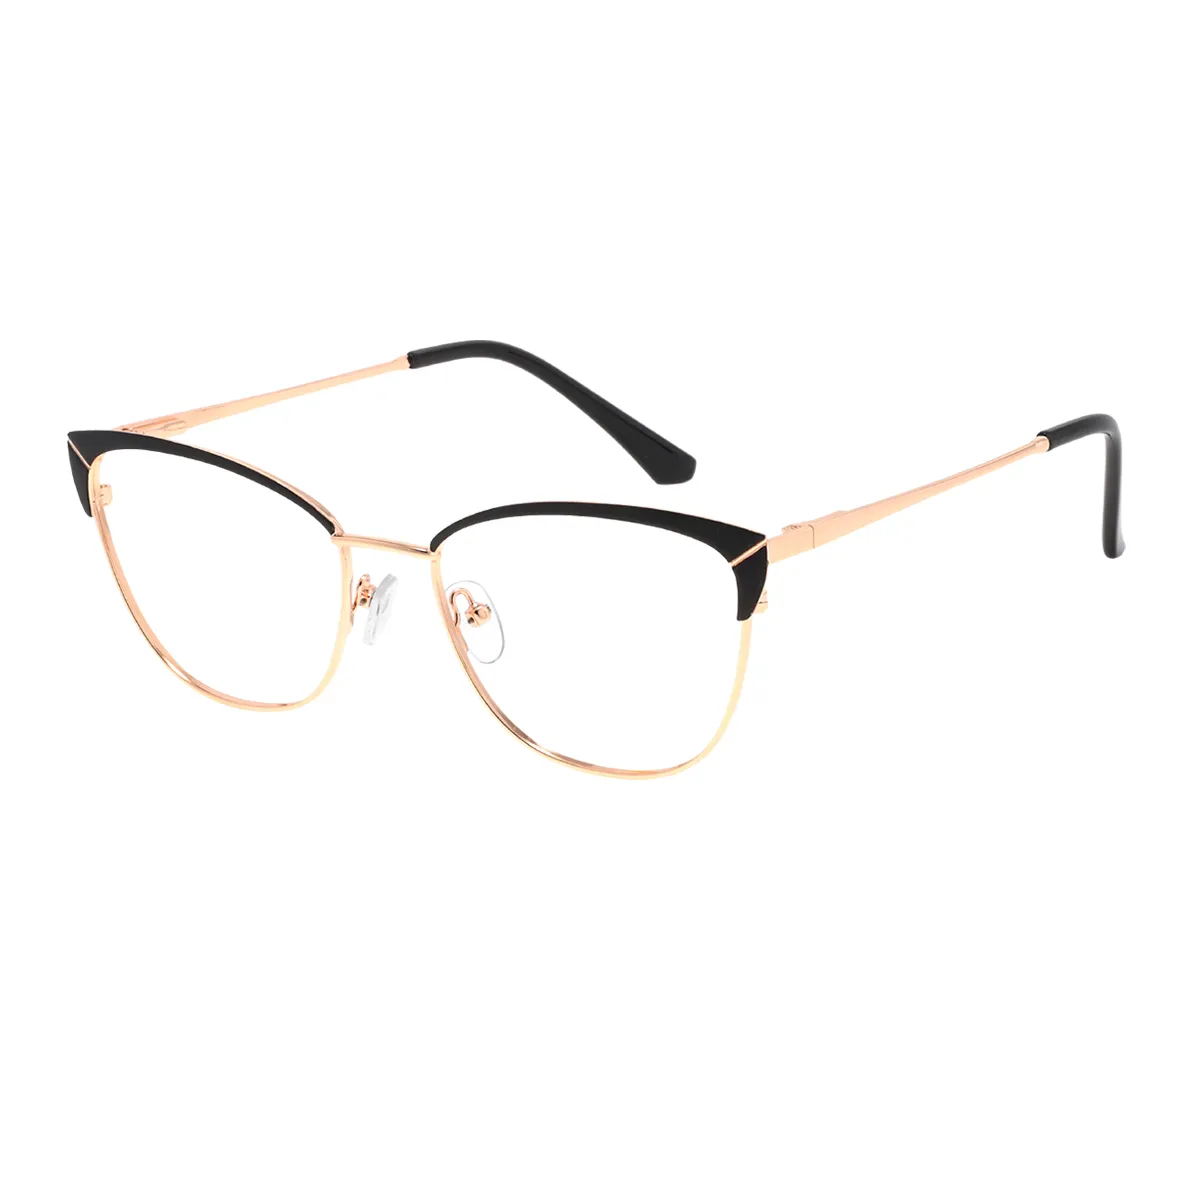 Fashion Browline Red-gold Glasses for Women